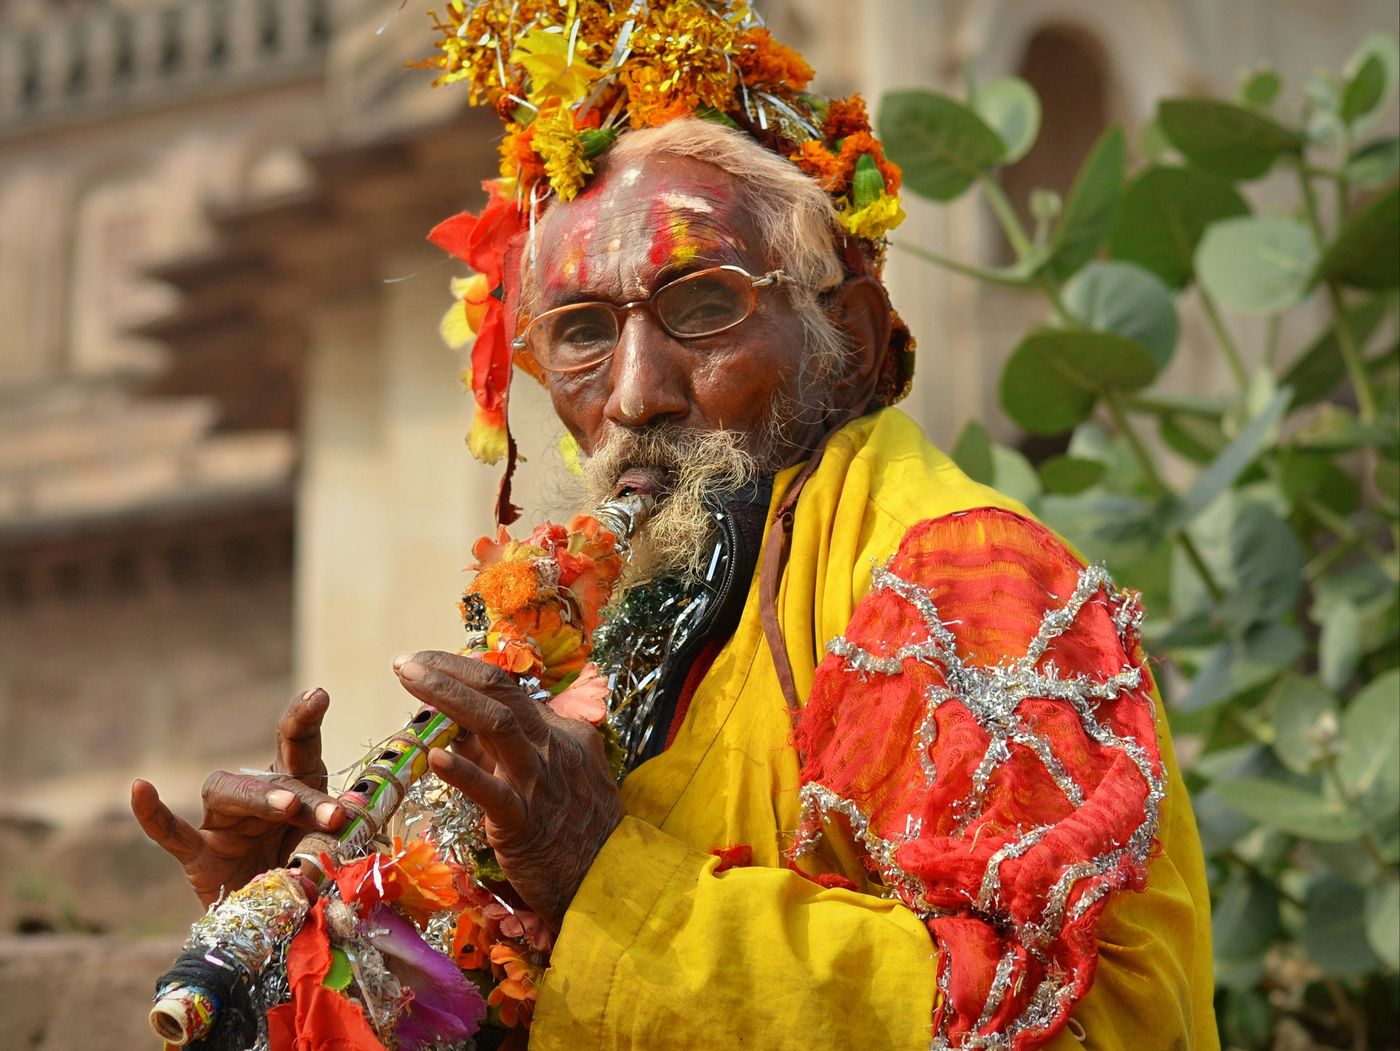 A bespectacled sadhu, with a white mustache and a colorful headgear, playing jheeka, a traditional Indian instrument, outside Ram Raja Mandir, Orchha 